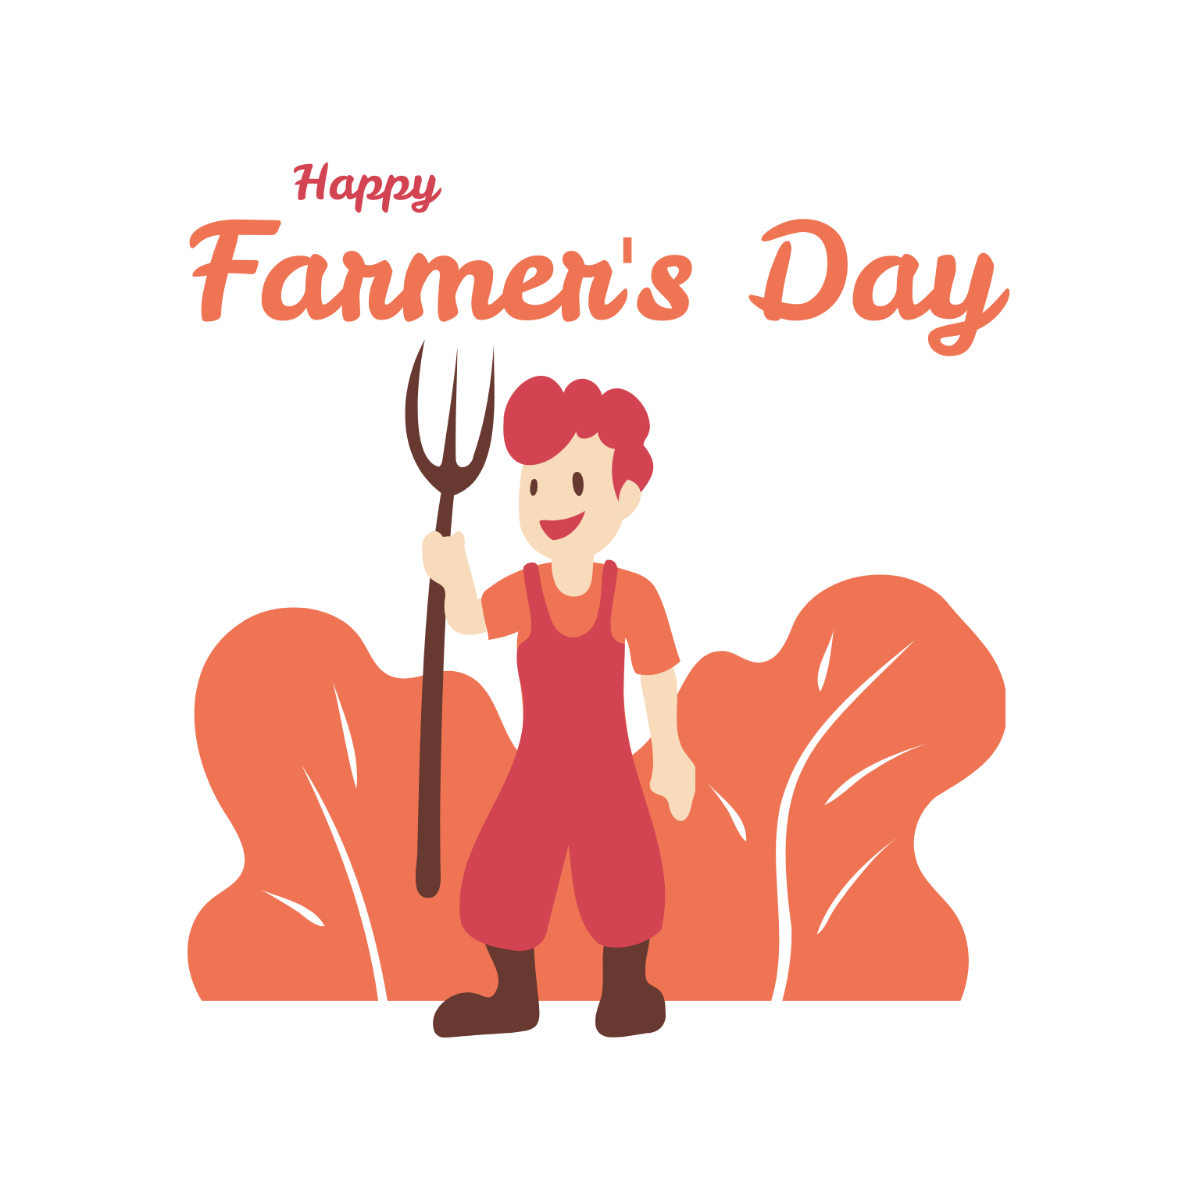 Happy Farmers Day Illustration Template